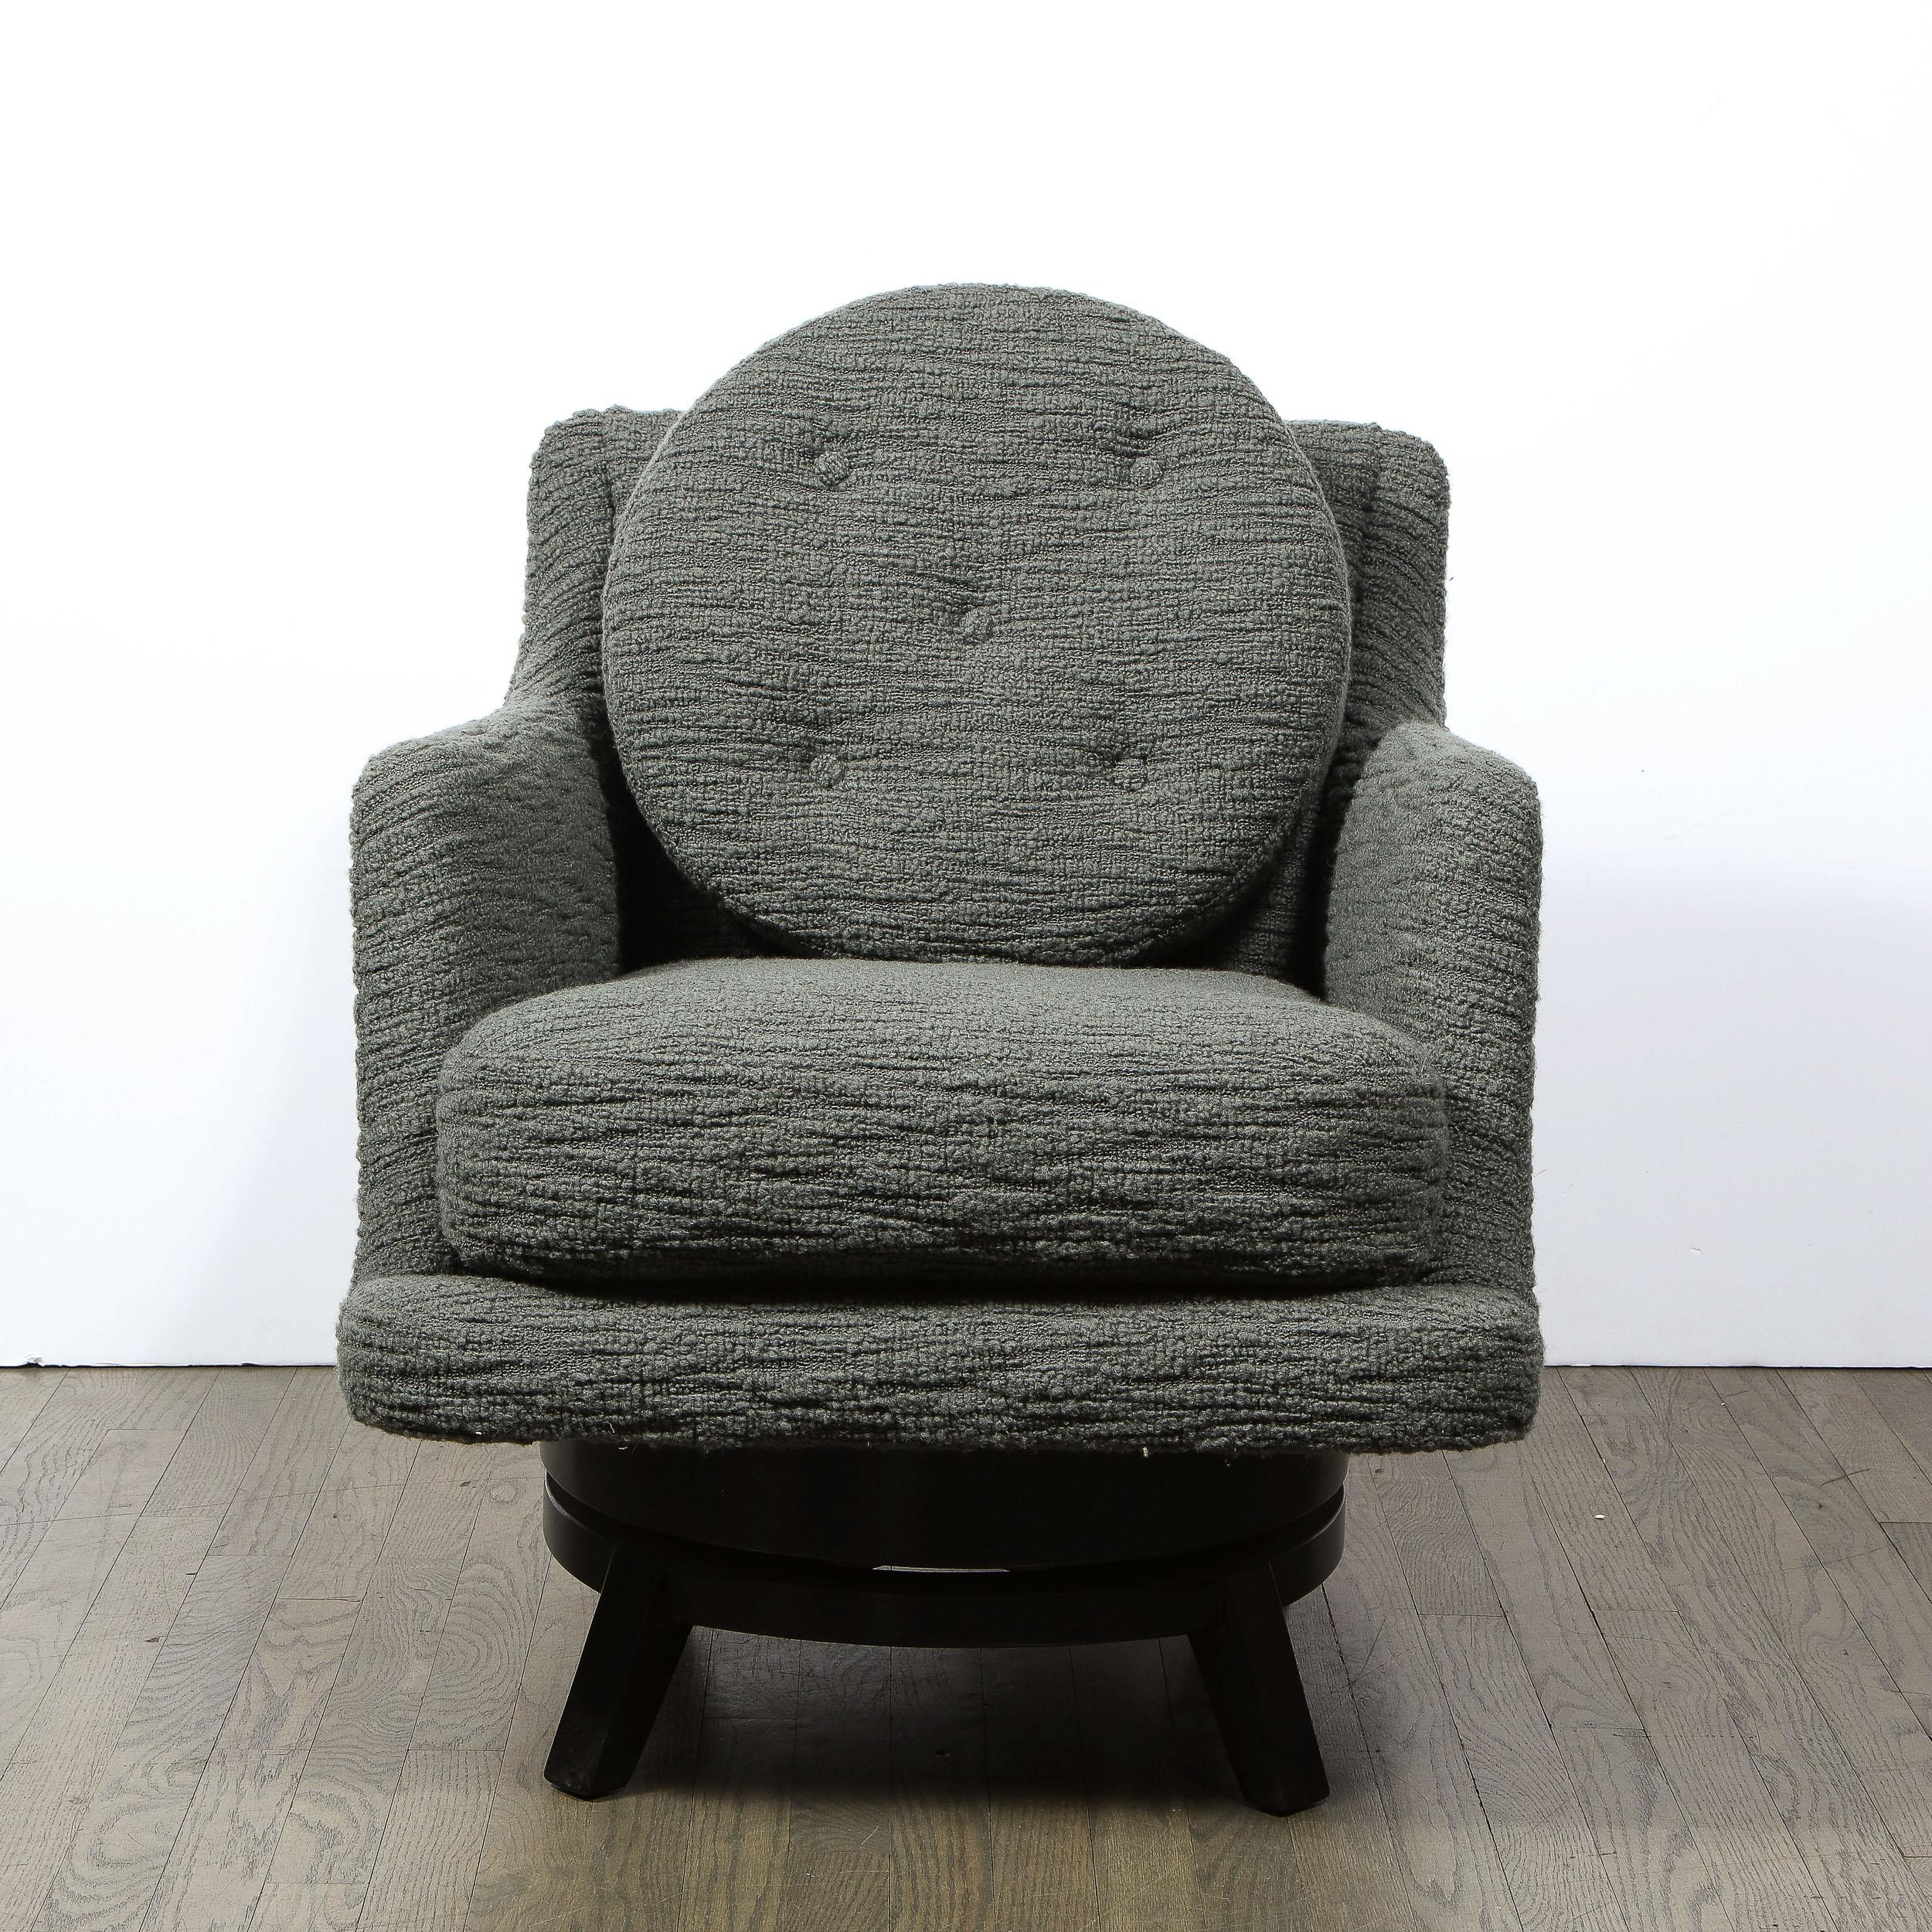 Designed by Edward Wormley for Dunbar, these swivel chairs are an excellent balance of simplified geometric forms delivering a powerful and charmed presence. Reupholstered in Holly Hunt Great Plains boucle in a Deep Loden hue, the calming color and